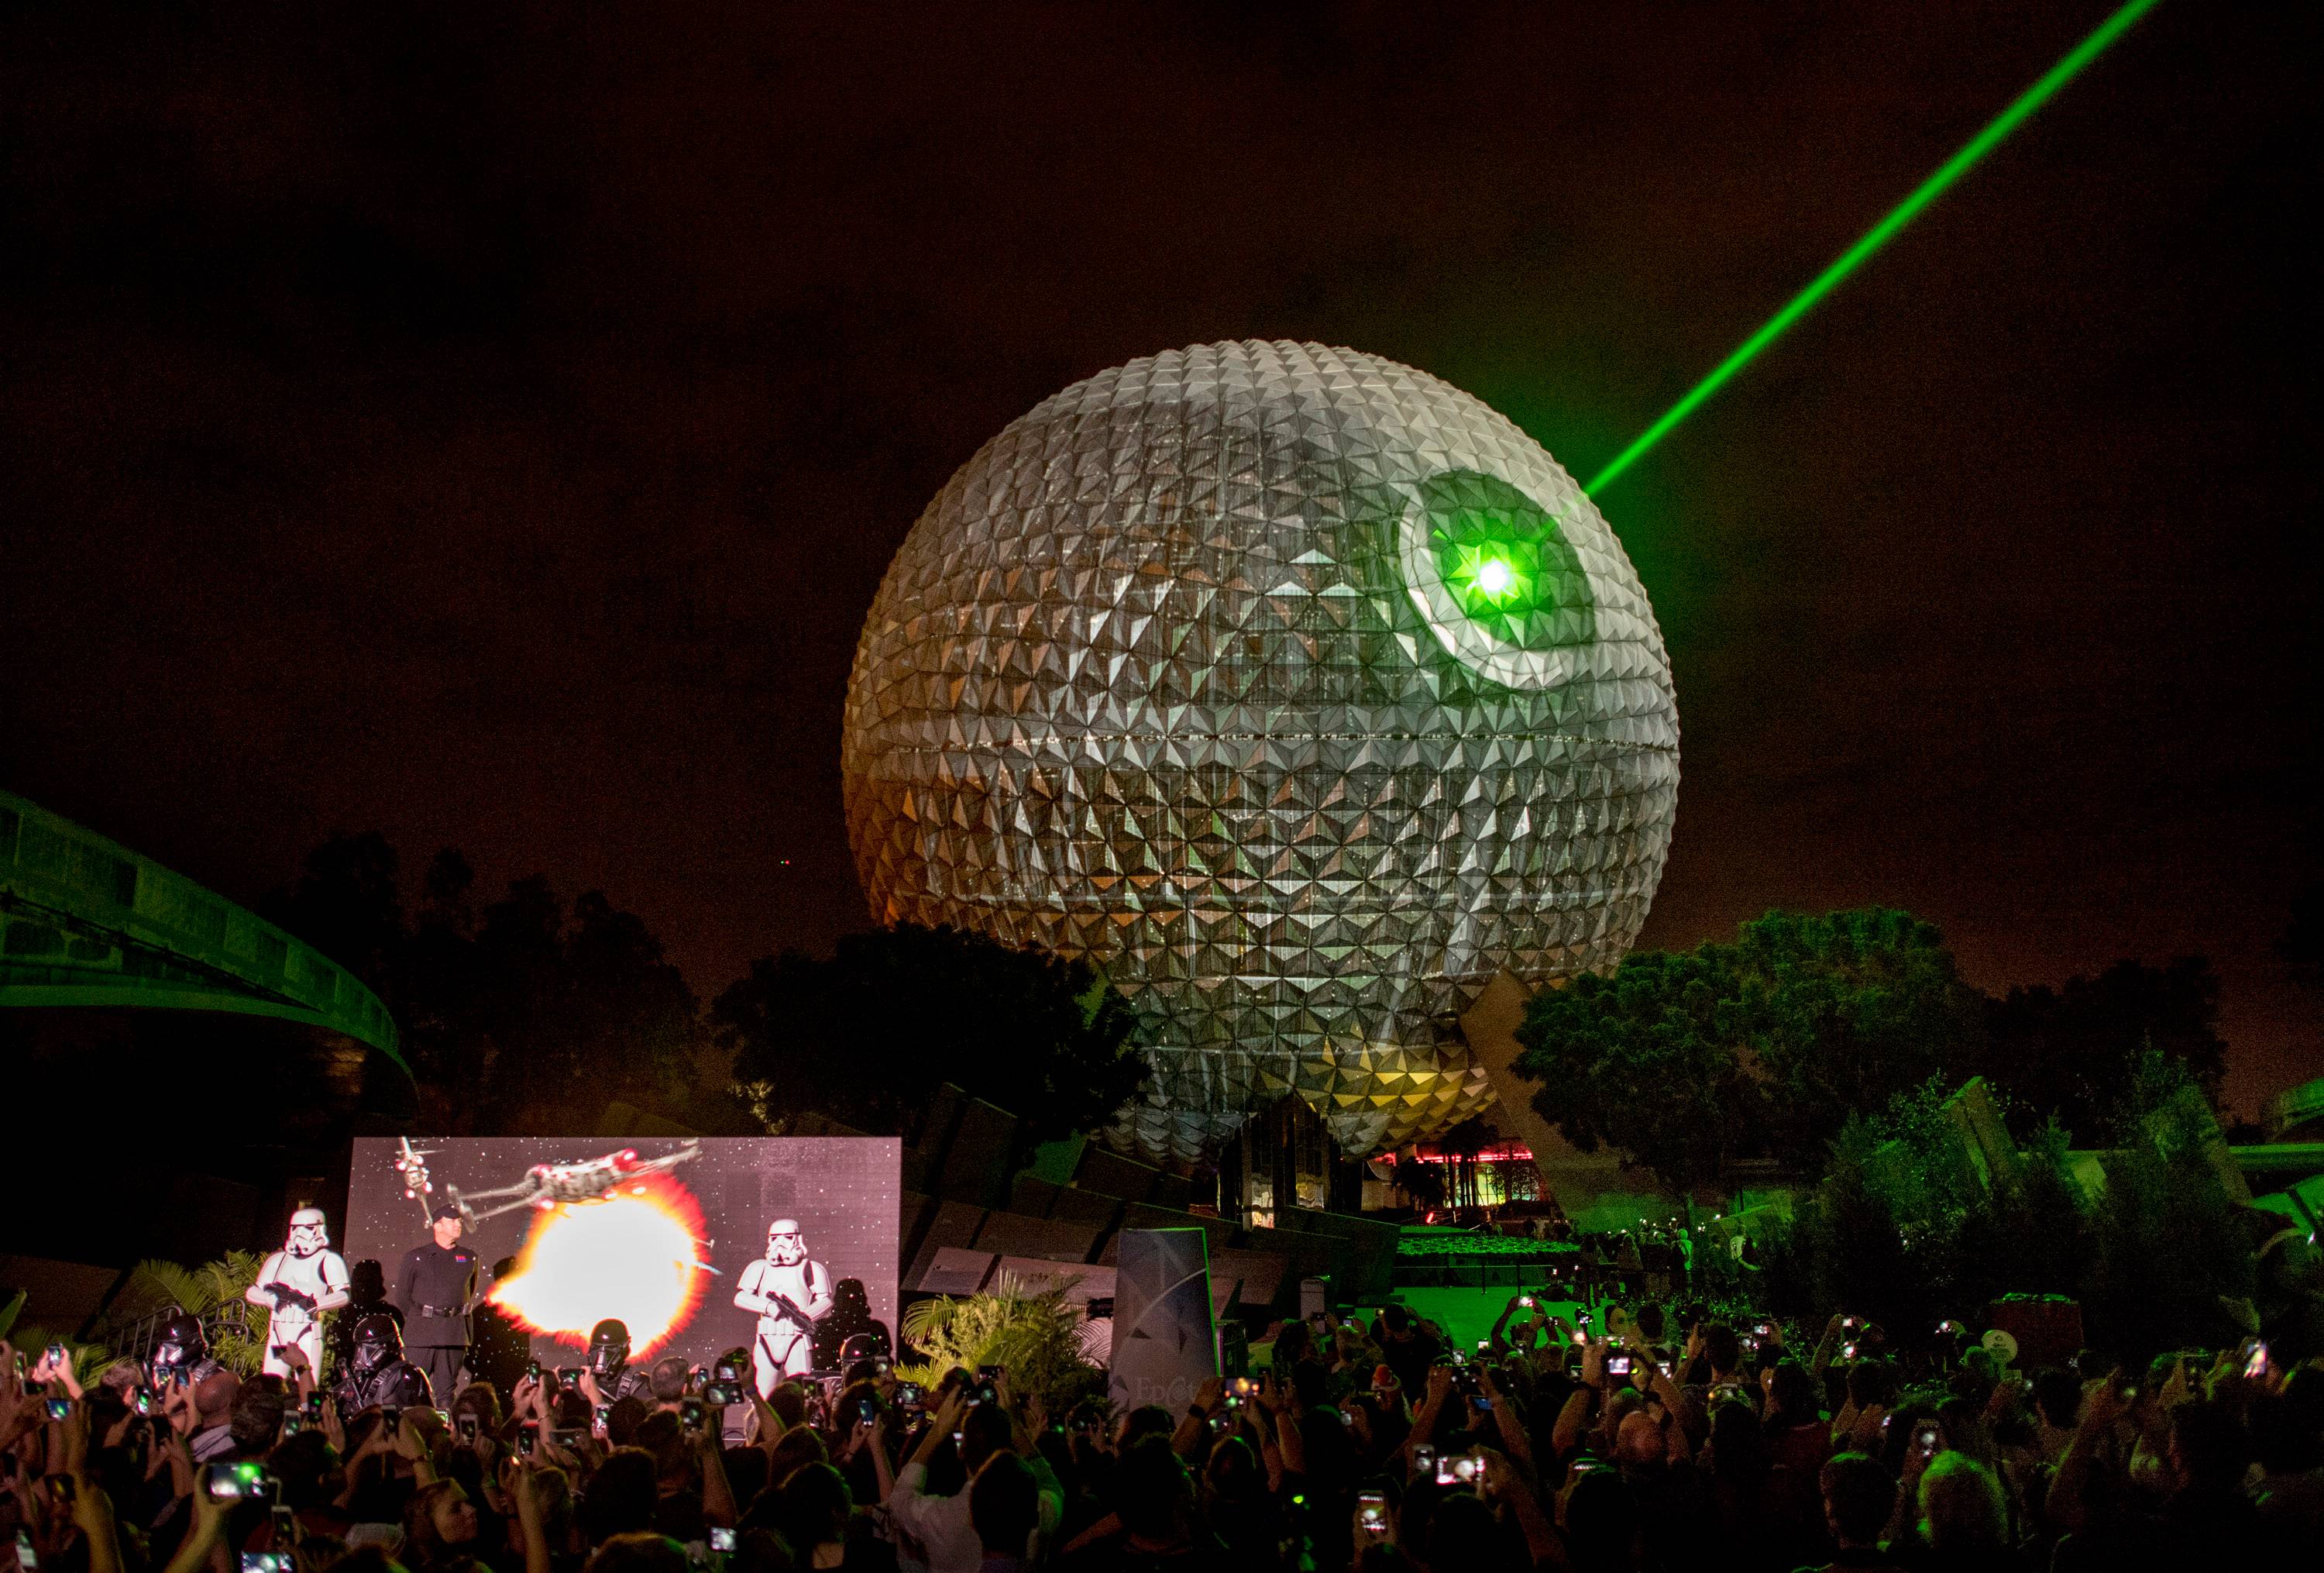 VIDEO - Spaceship Earth transforms into the Death Star to celebrate 'Rogue One - A Star Wars Story'